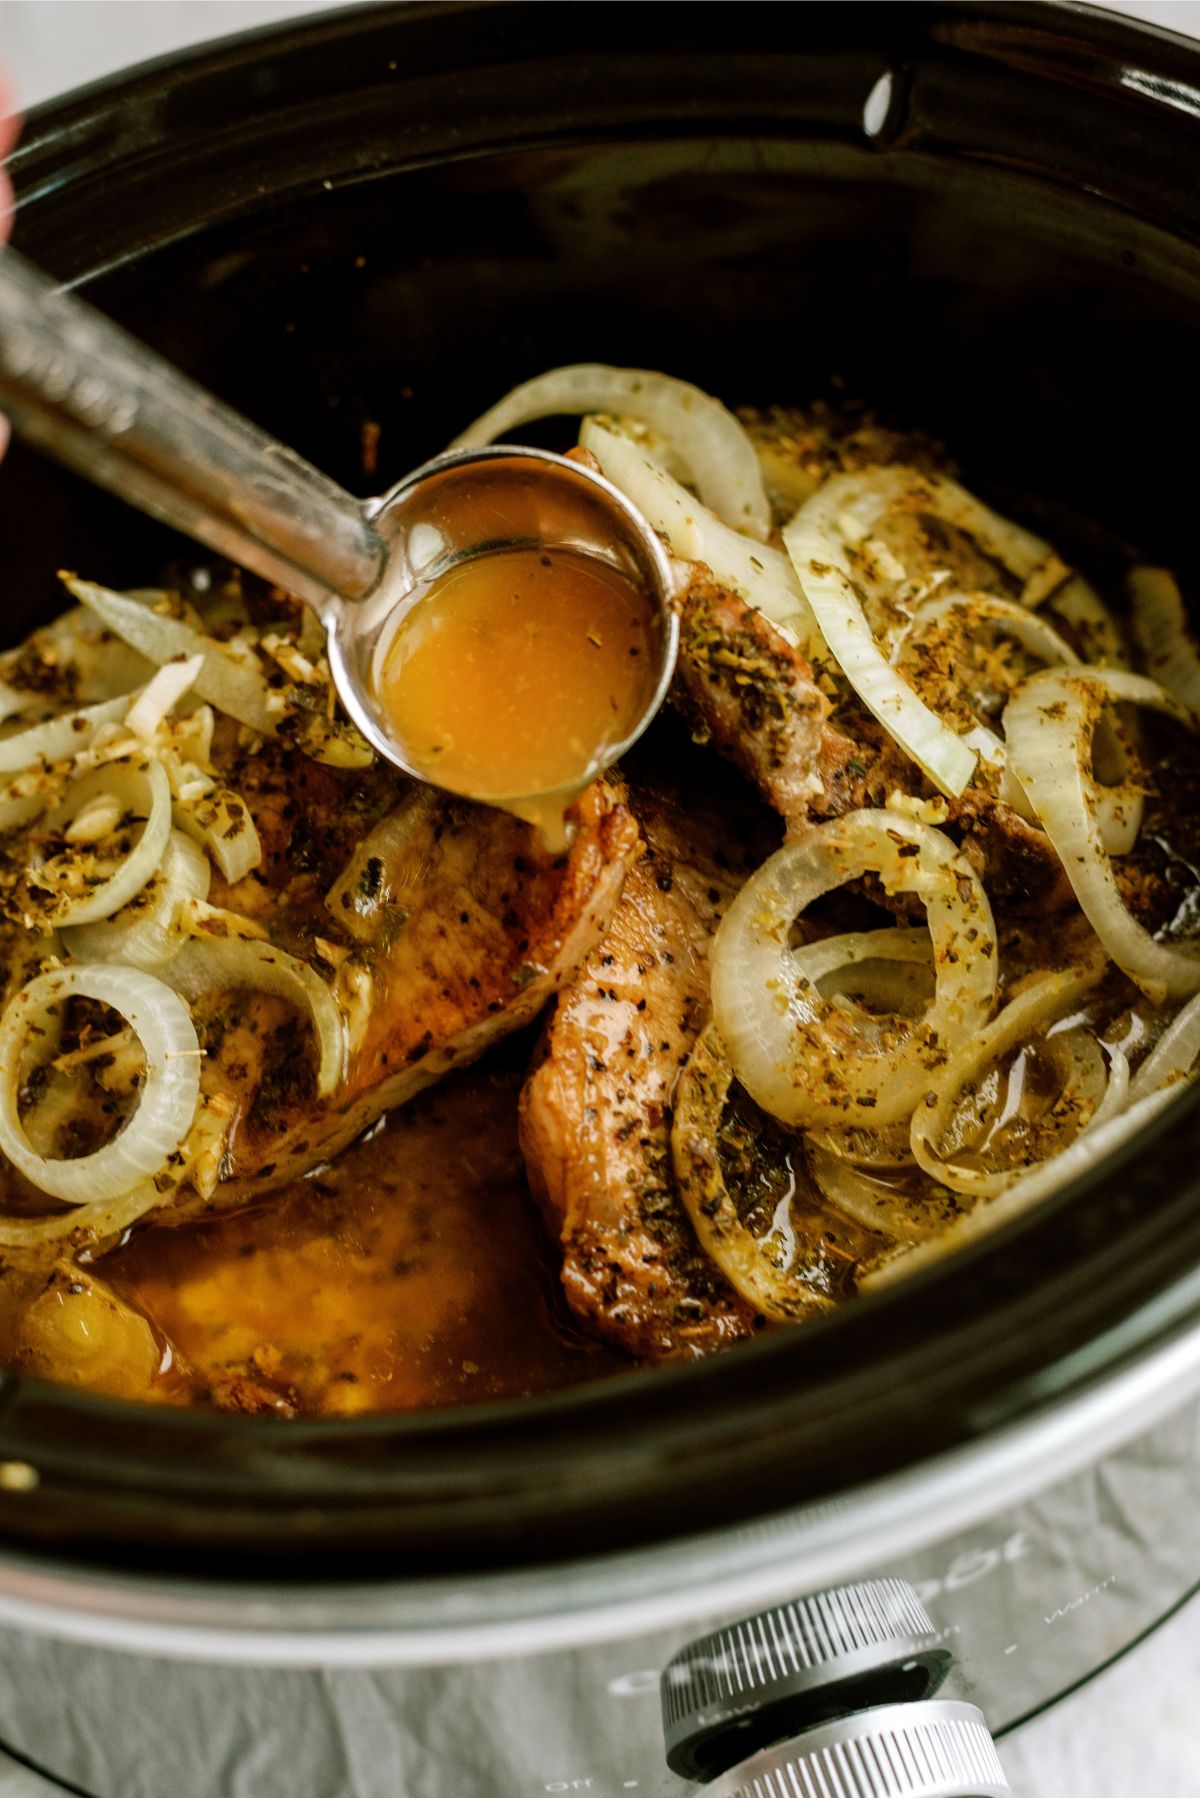 Slow cooker with pork chops and a spoon pouring cooking juices on top.